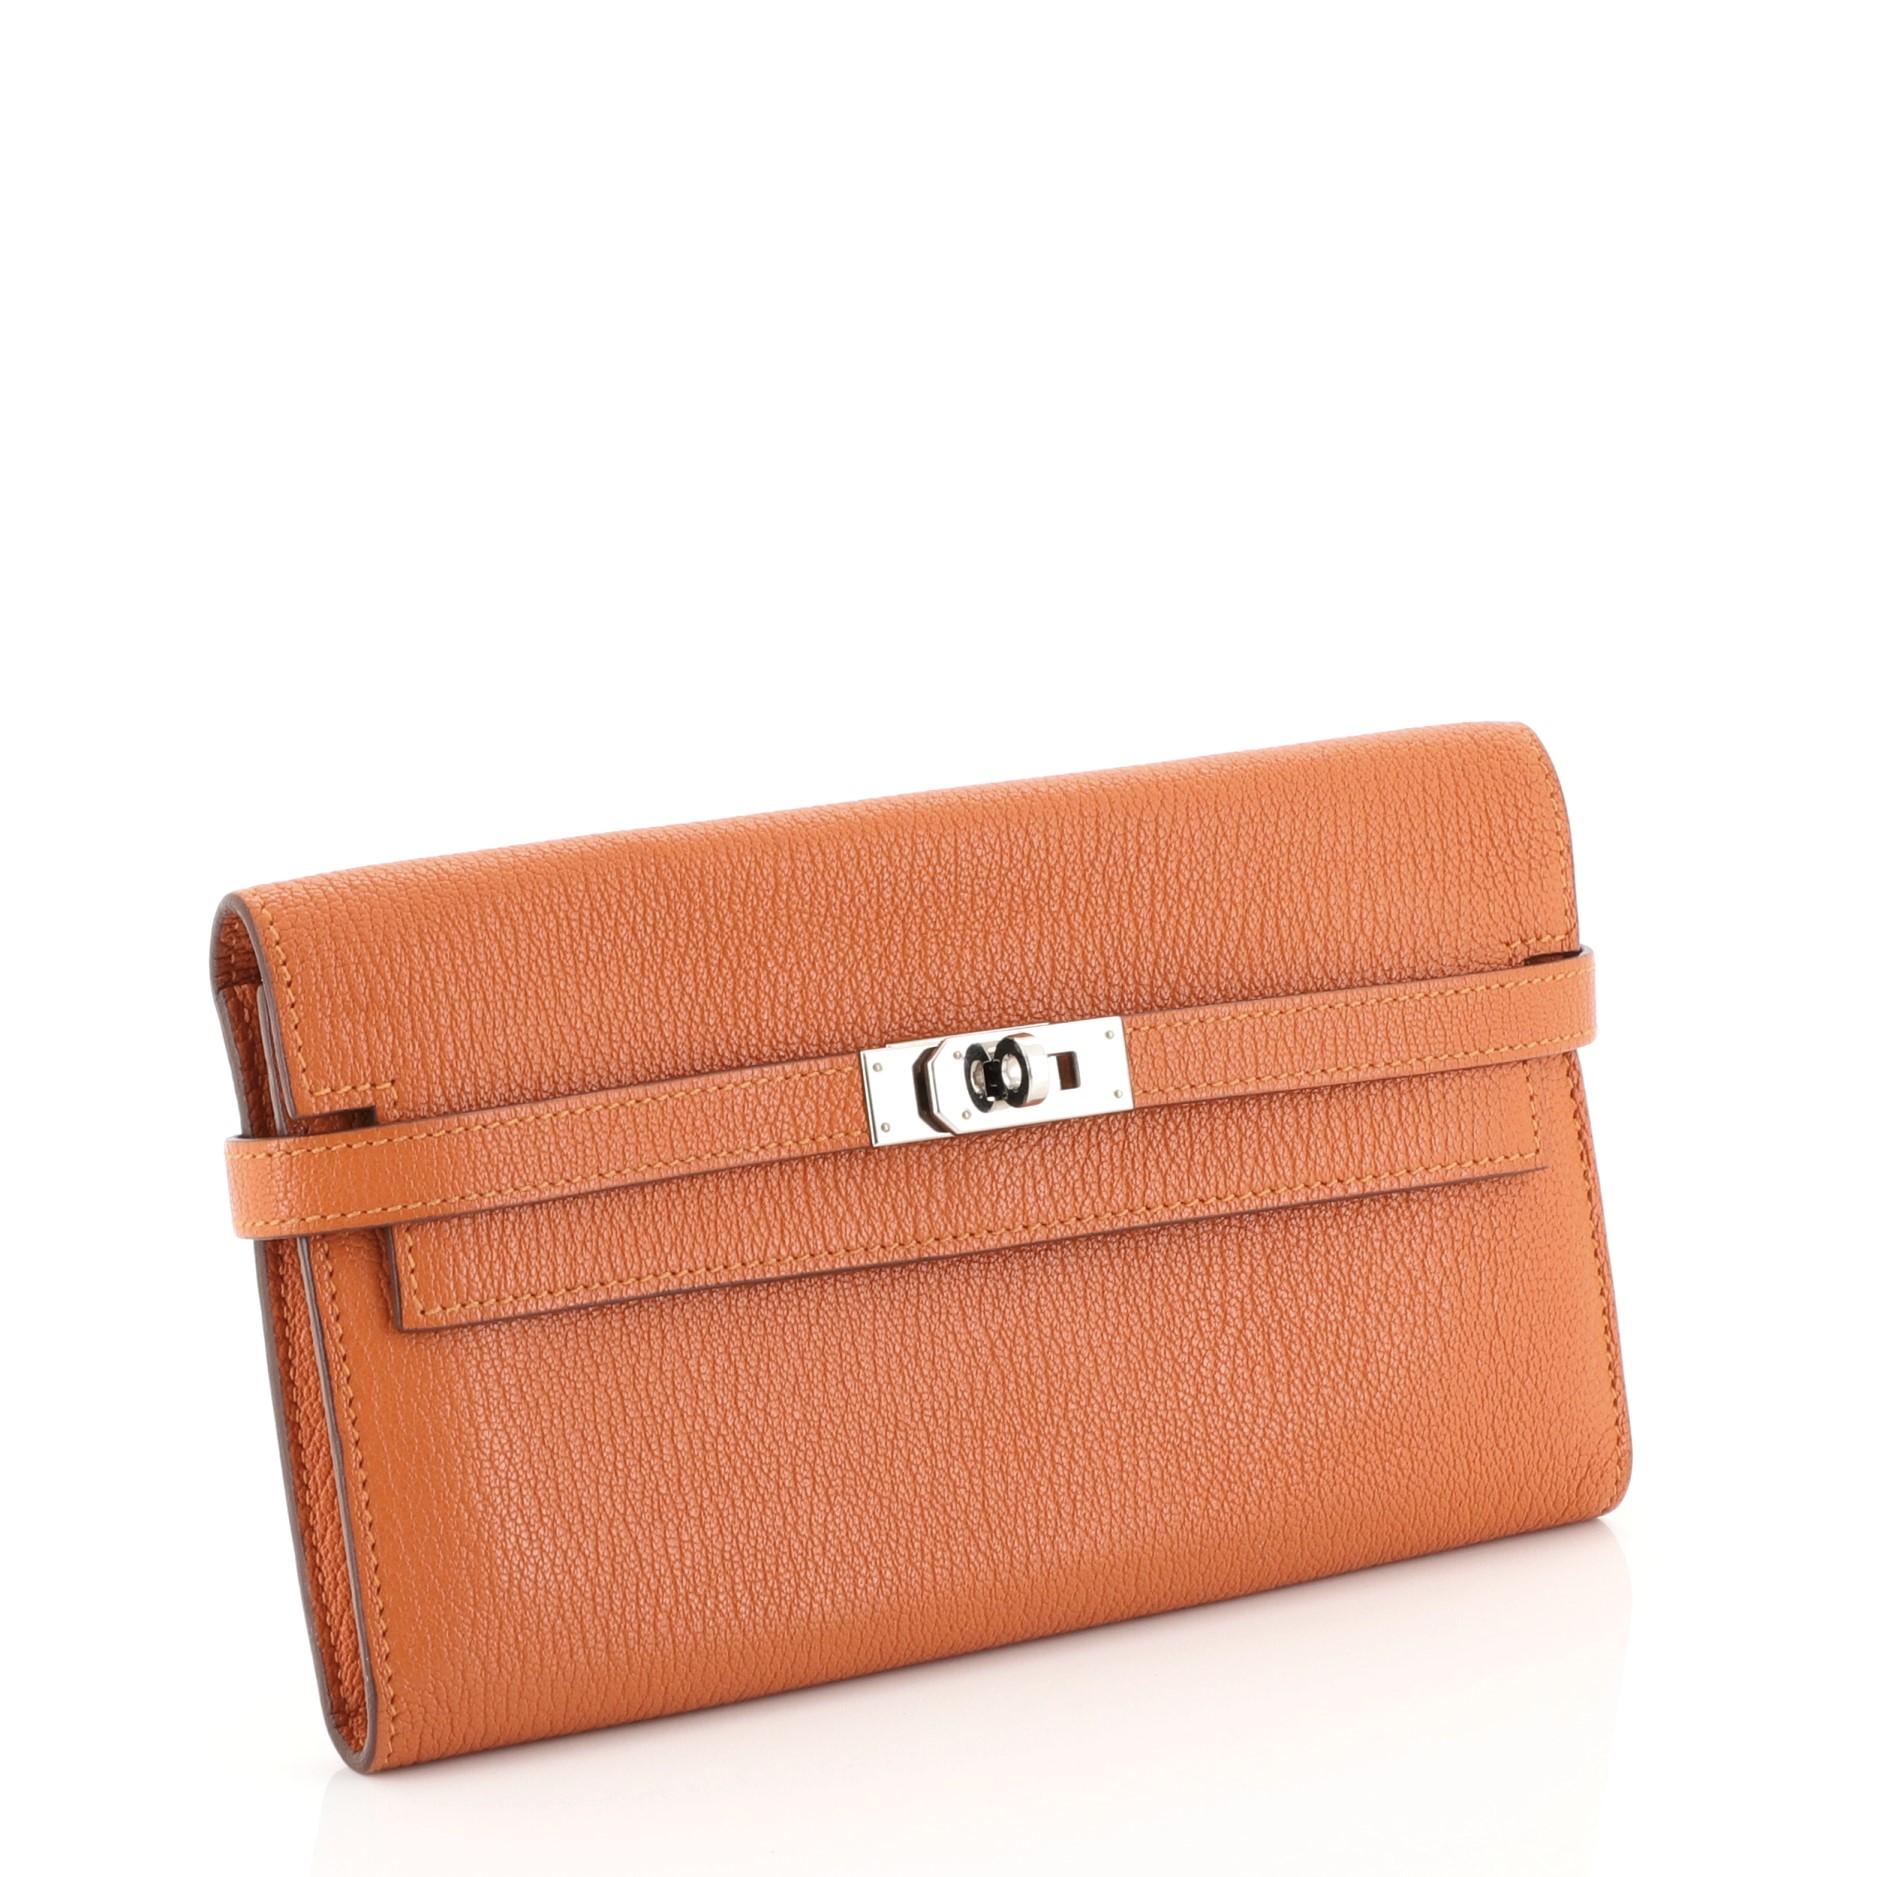 This Hermes Kelly Wallet Chevre Mysore Long, crafted in Orange H orange Chevre Mysore leather, features palladium hardware. Its turn-lock closure opens to an Orange H orange Chevre Mysore leather interior with middle zip compartment, slip pocket and